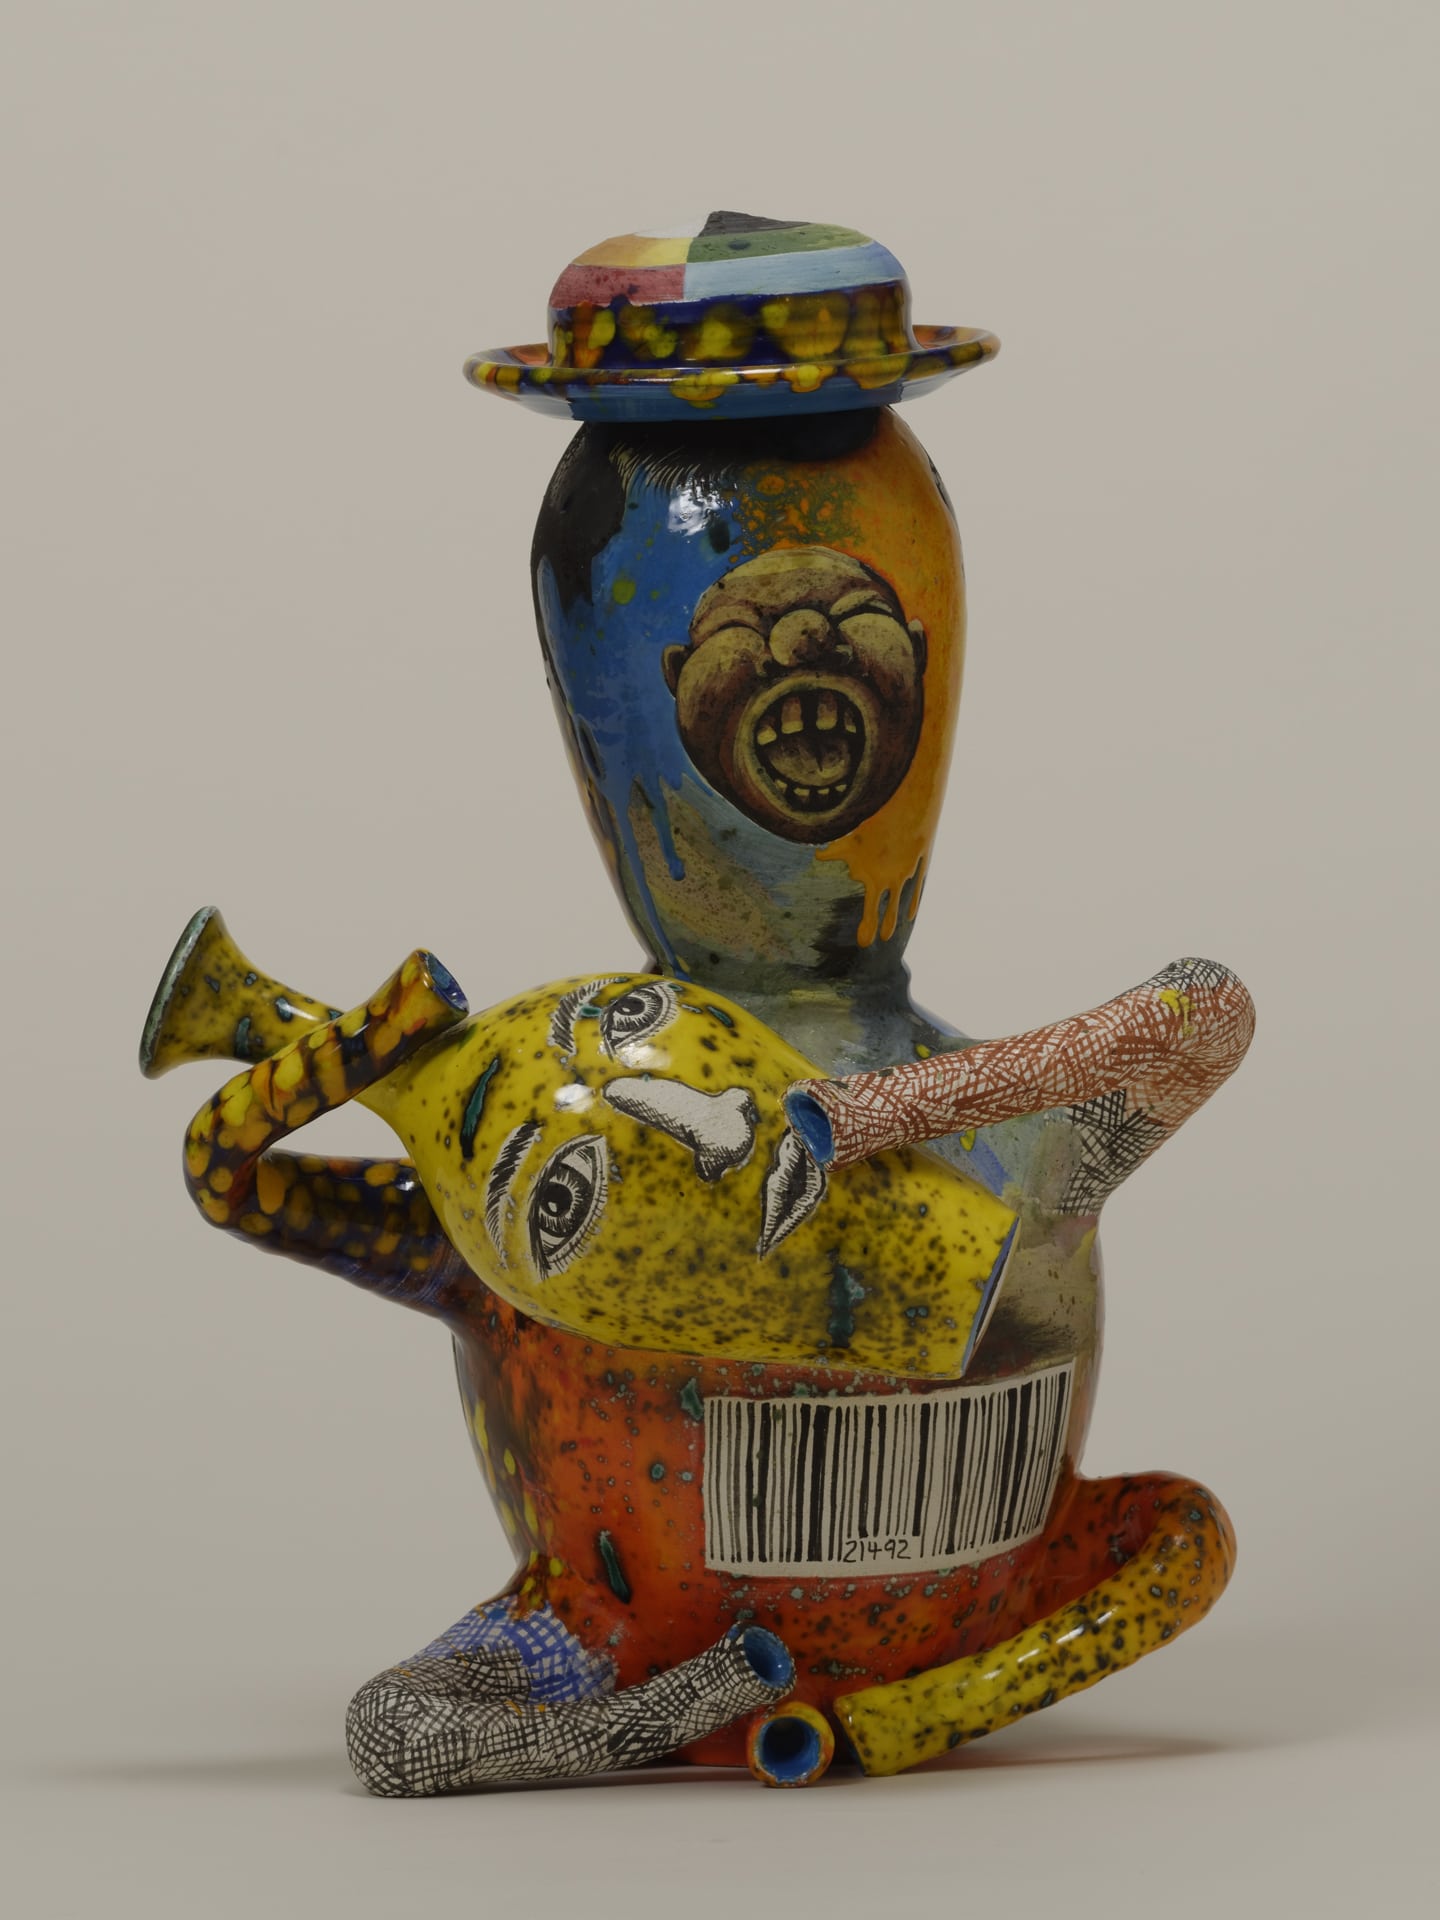 a colorful teapot shaped like a seated man wearing a hat holding a jug with a face on it that forms the spout